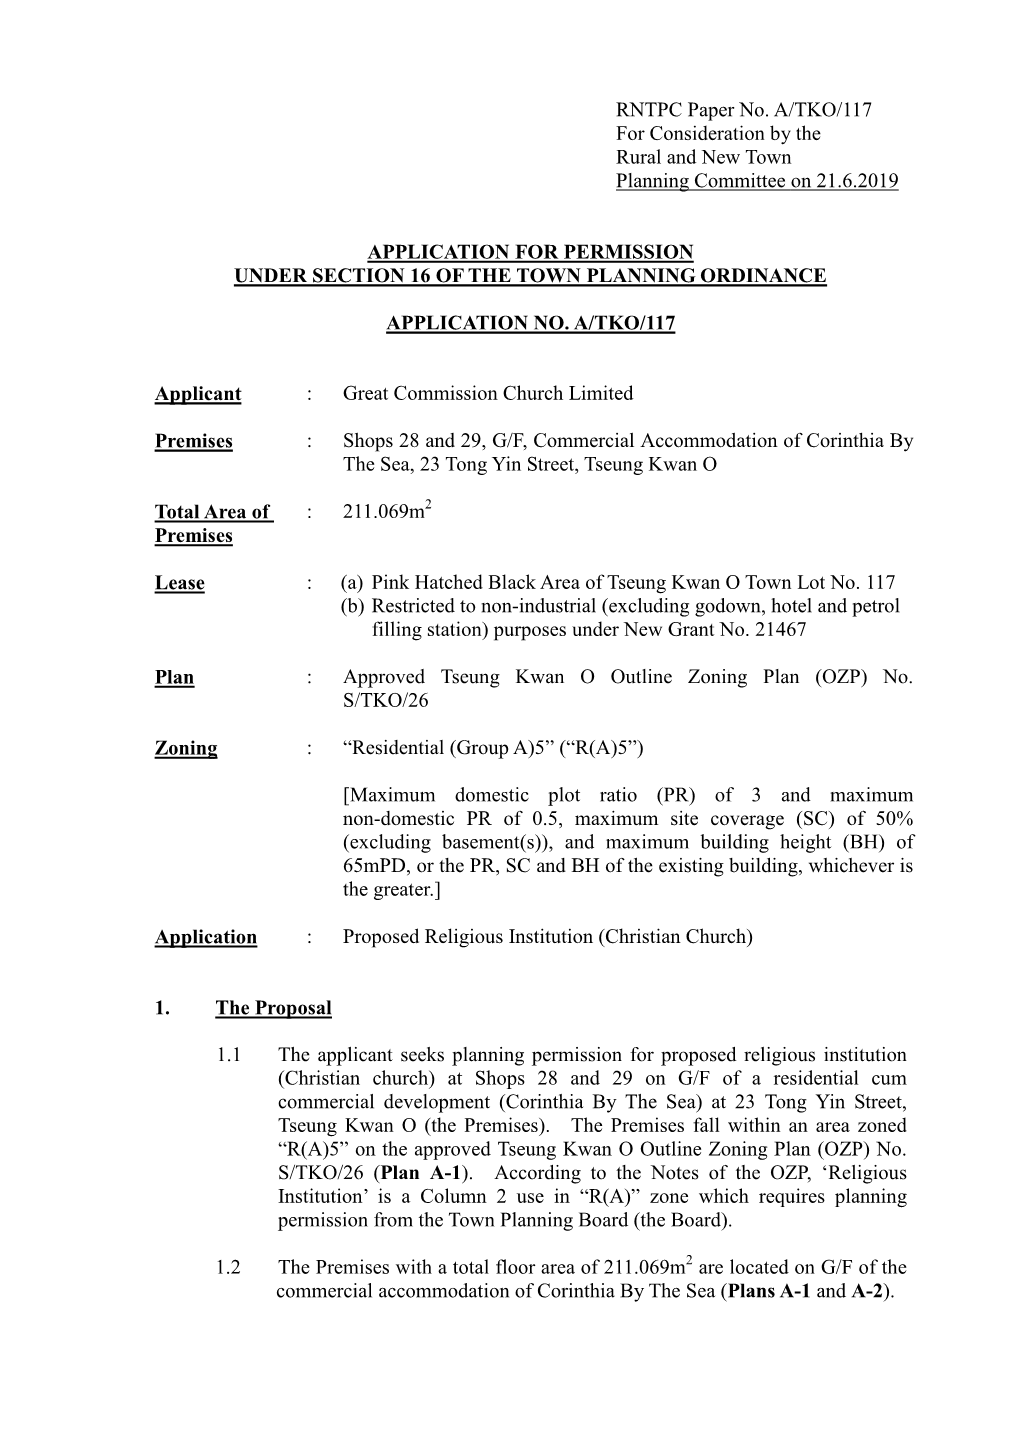 RNTPC Paper No. A/TKO/117 for Consideration by the Rural and New Town Planning Committee on 21.6.2019